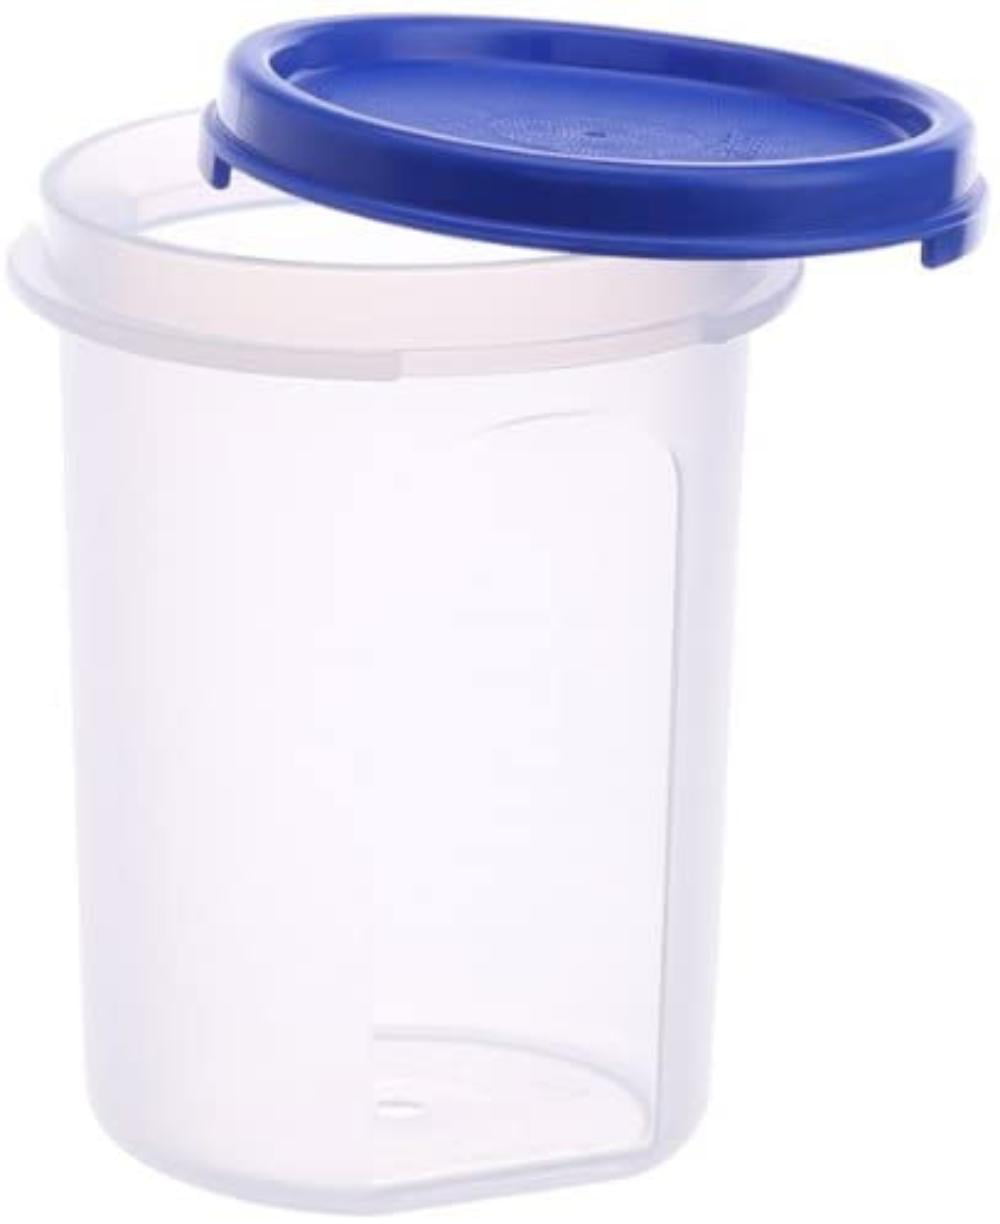 Set of 2- Colors may vary Tupperware Canister Scoops 